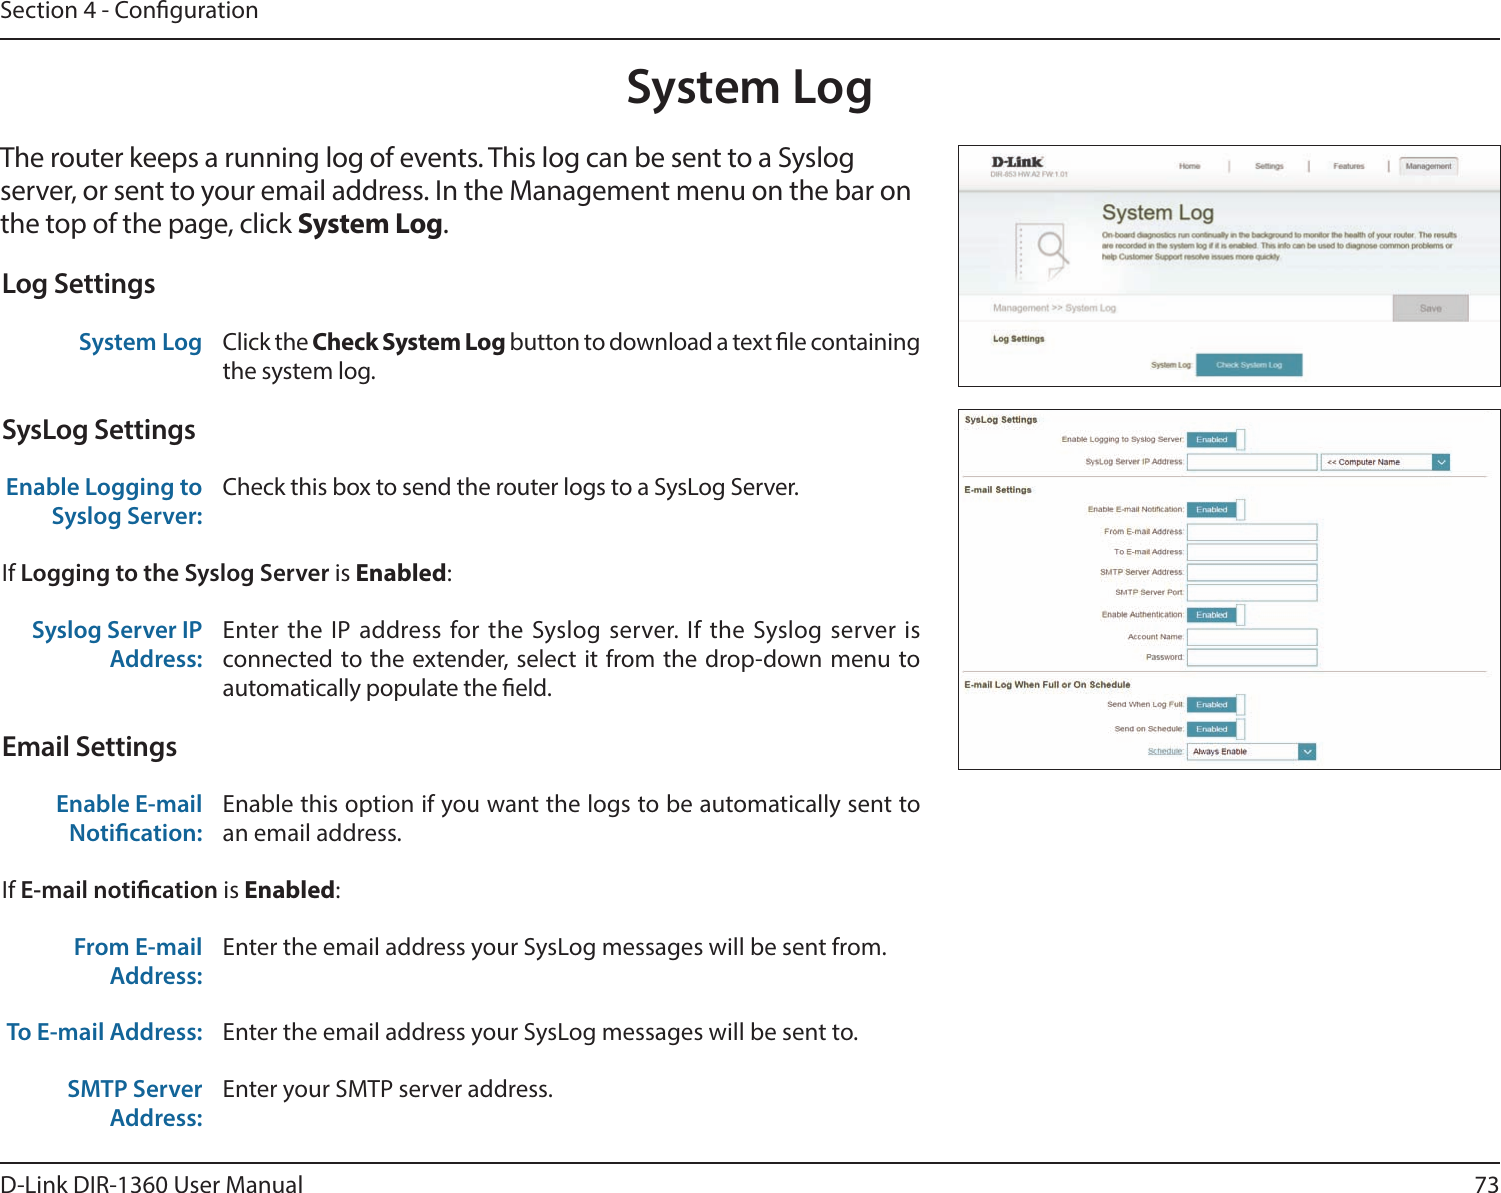 73D-Link DIR-1360 User ManualSection 4 - CongurationSystem LogThe router keeps a running log of events. This log can be sent to a Syslog server, or sent to your email address. In the Management menu on the bar on the top of the page, click System Log. Log SettingsSystem Log Click the Check System Log button to download a text le containing the system log.SysLog SettingsEnable Logging to Syslog Server:Check this box to send the router logs to a SysLog Server. If Logging to the Syslog Server is Enabled:Syslog Server IP Address:Enter the IP address for the Syslog server. If the Syslog server is connected to the extender, select it from the drop-down menu to automatically populate the eld. Email SettingsEnable E-mail Notication:Enable this option if you want the logs to be automatically sent to an email address.If E-mail notication is Enabled:From E-mail Address:Enter the email address your SysLog messages will be sent from.To E-mail Address: Enter the email address your SysLog messages will be sent to.SMTP Server Address:Enter your SMTP server address.